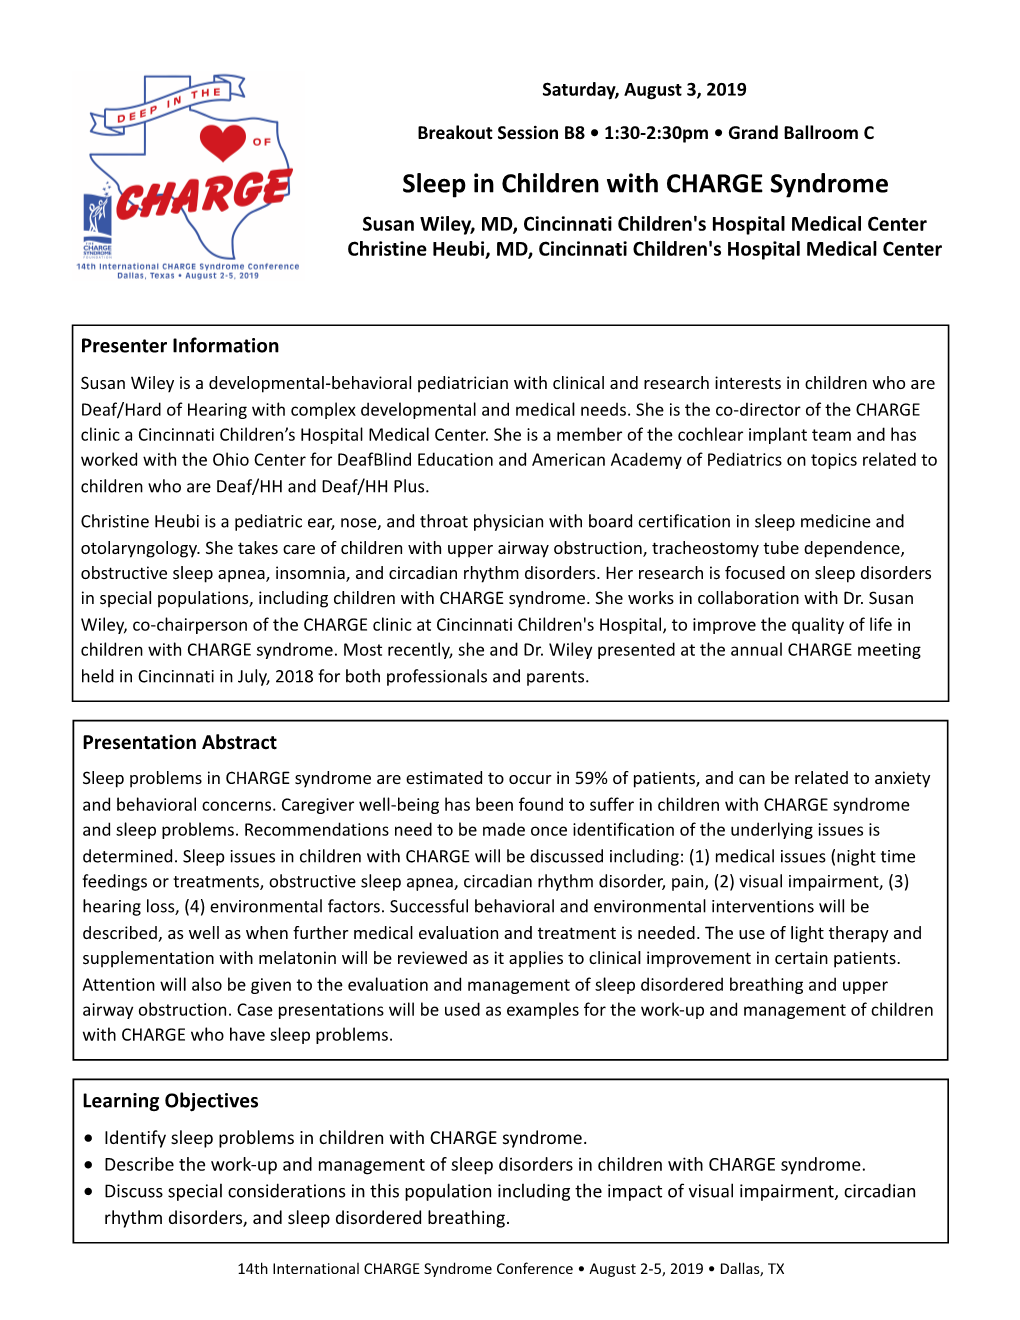 B8 Sleep in Children with CHARGE Syndrome